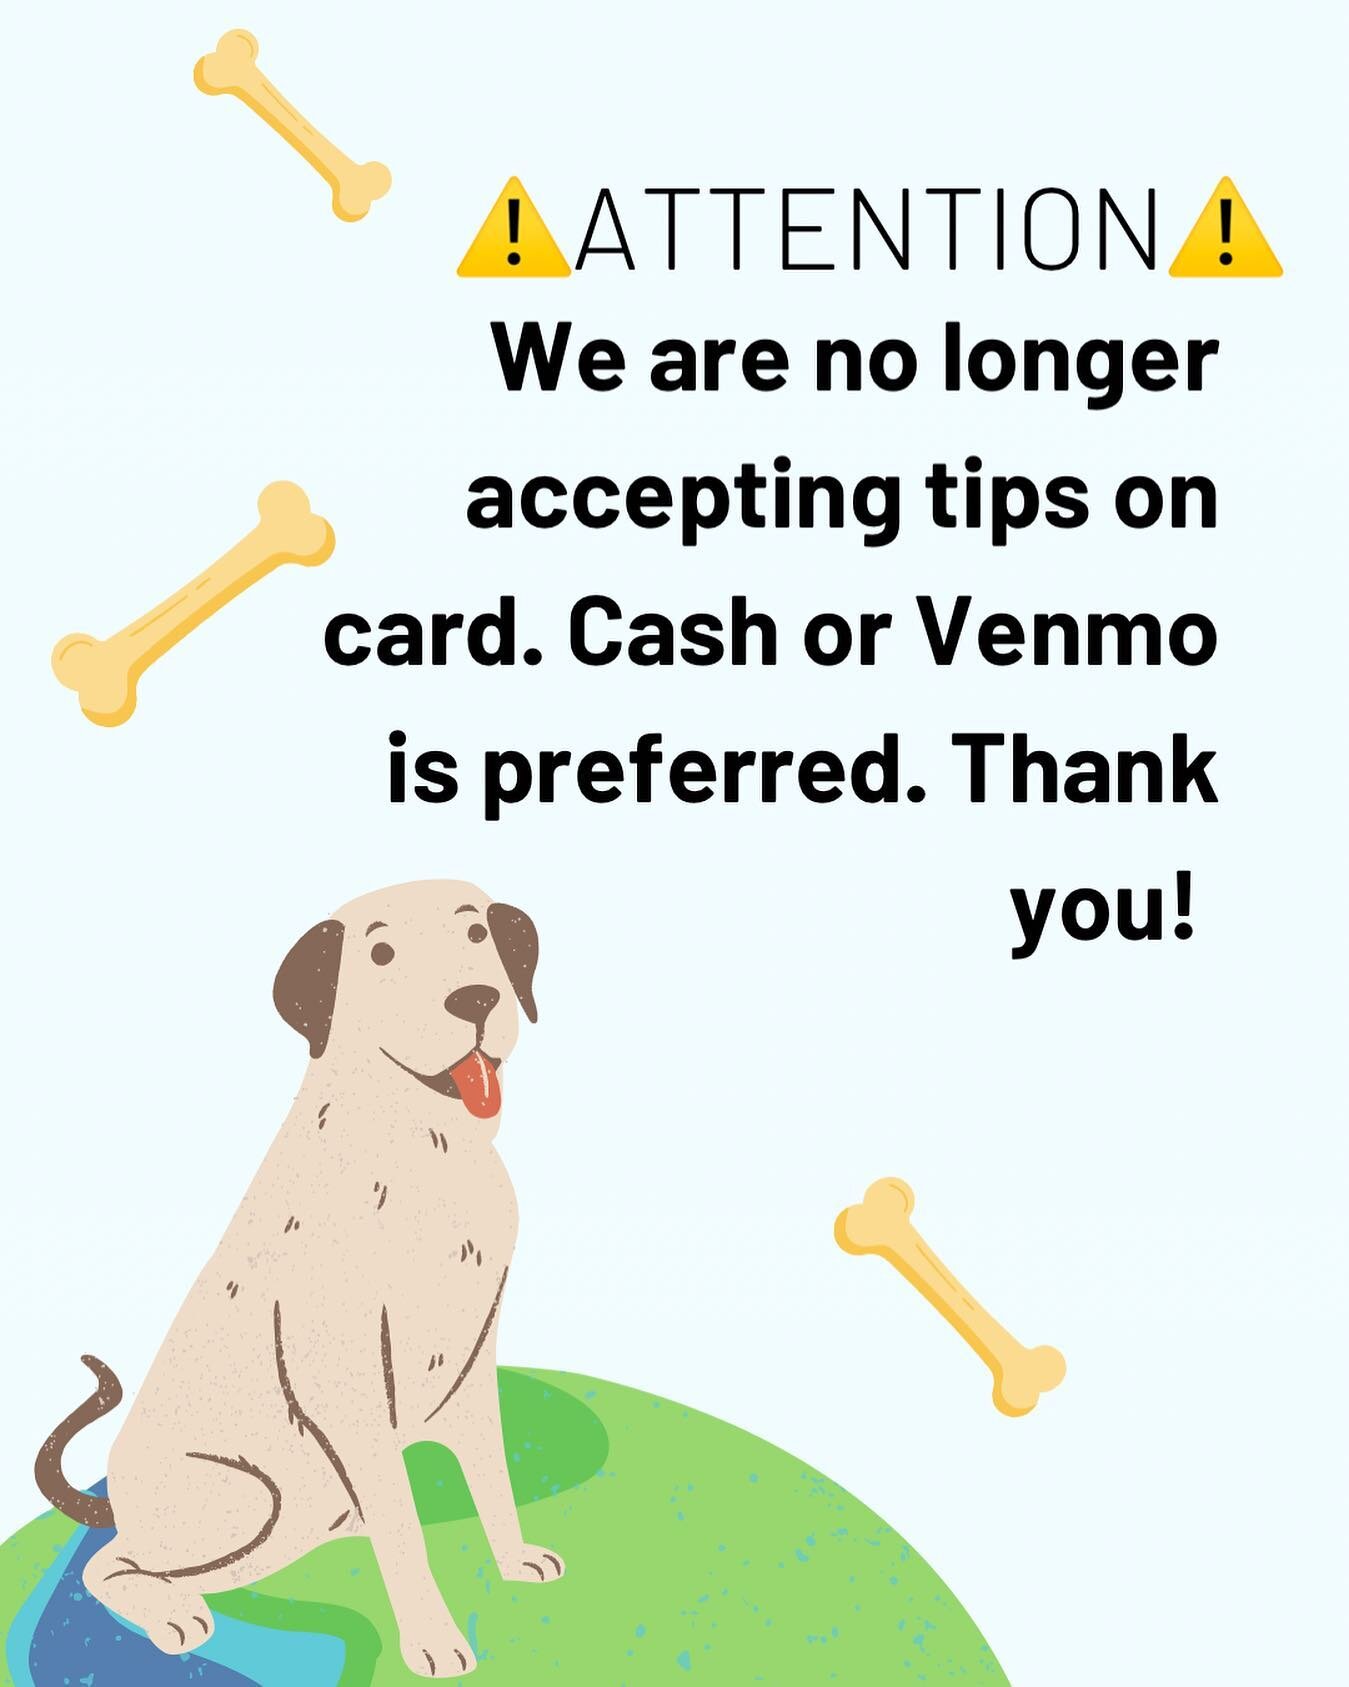 Hey everyone, we are no longer accepting tipping through card at checkout. Cash or Venmo is preferred. Thanks!🐾